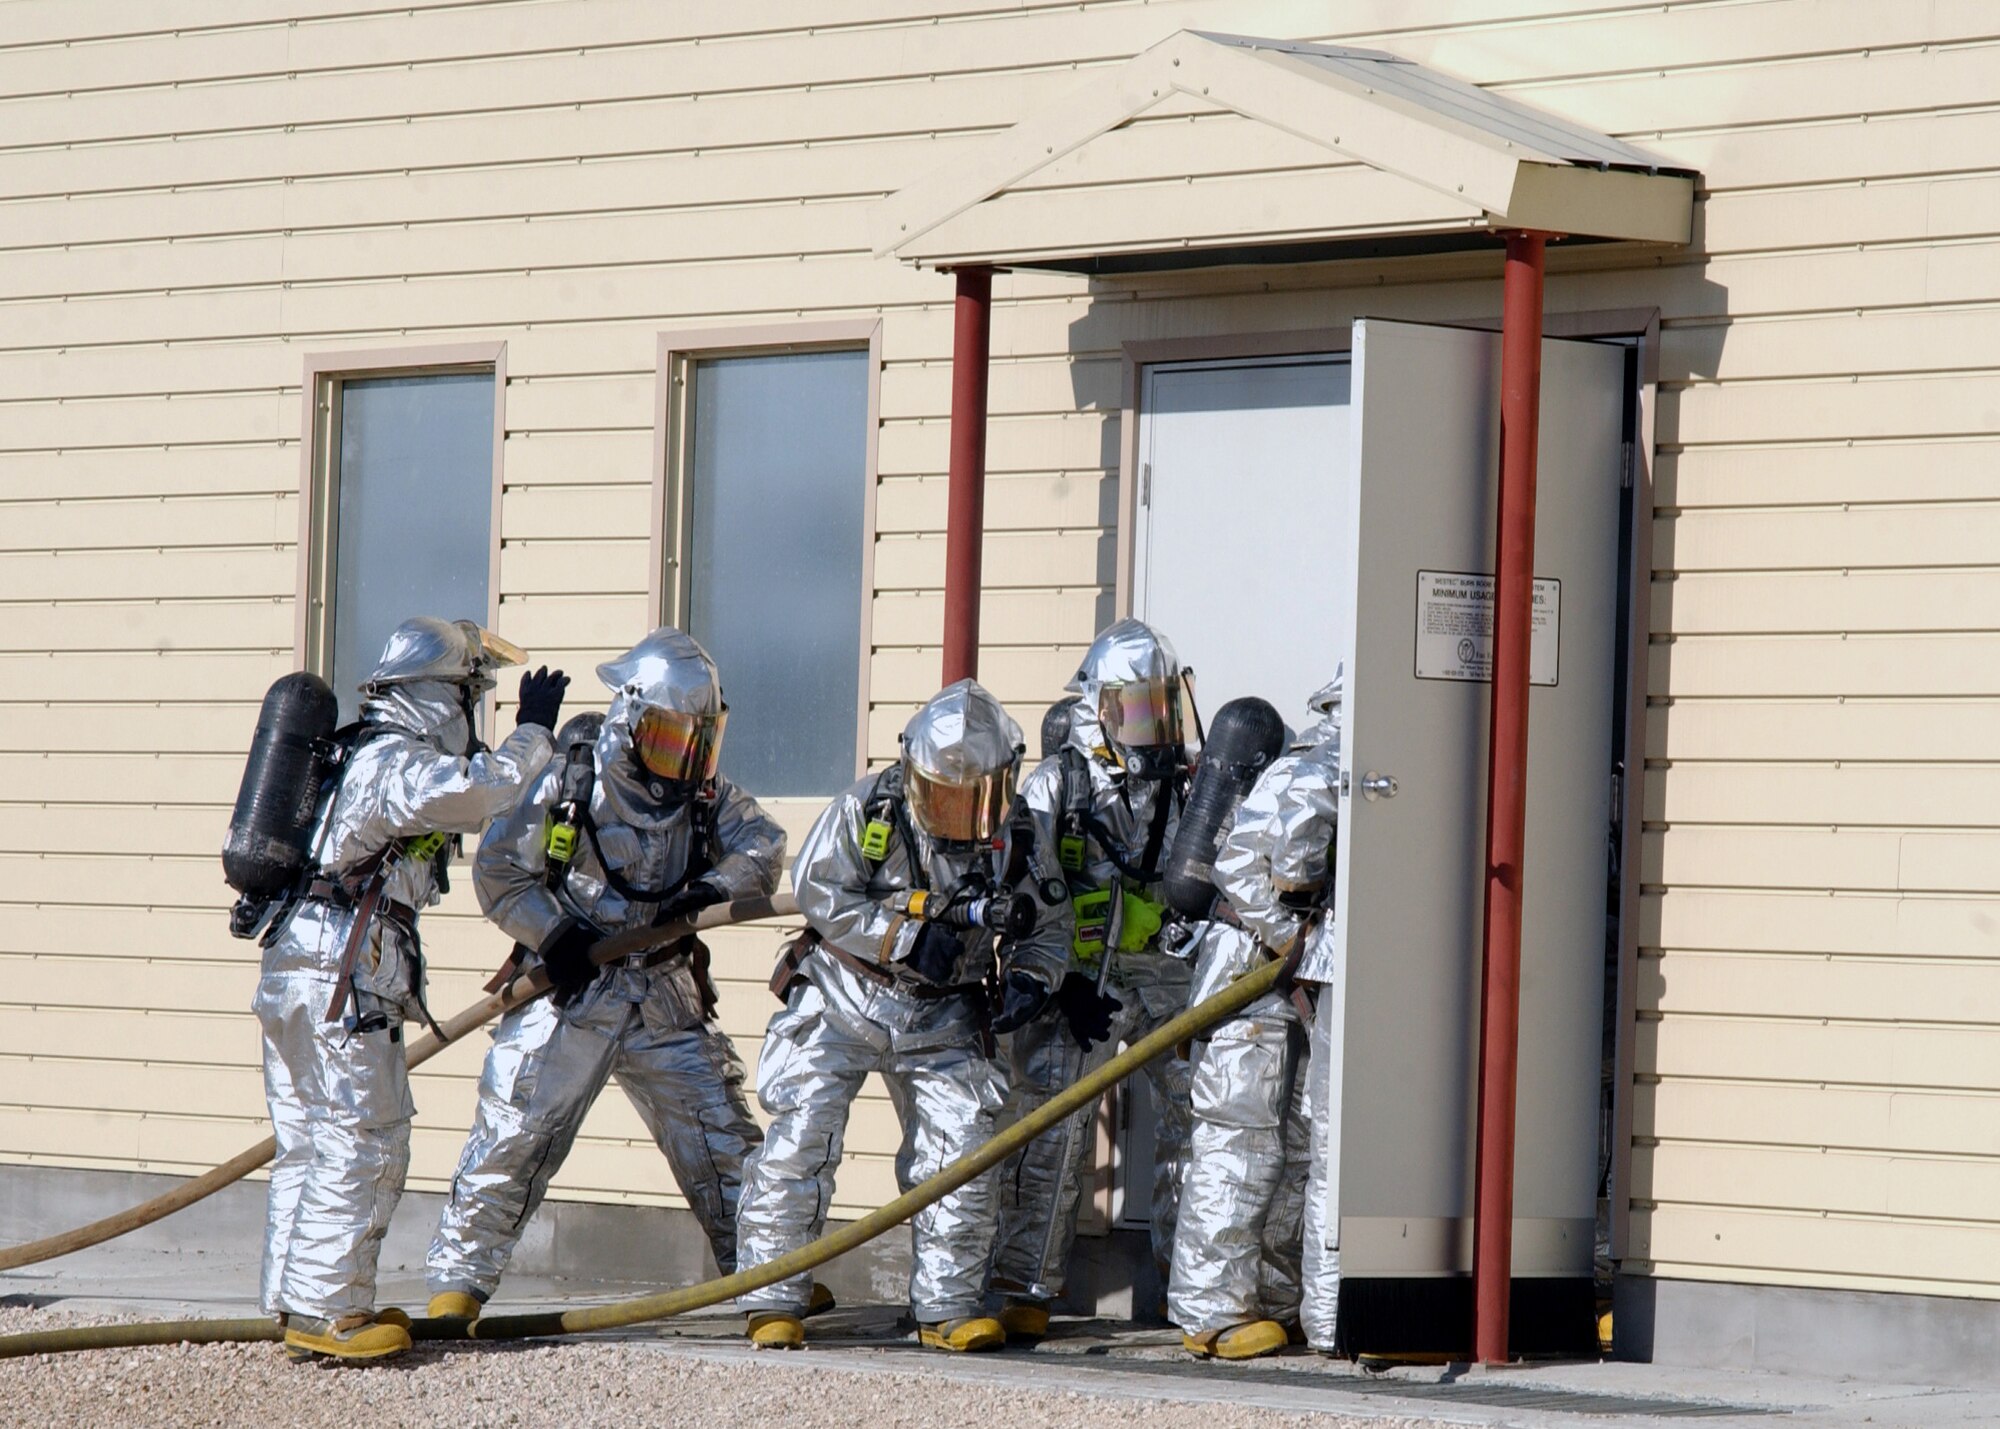 Incirlik Air Base firefighters from Engine 12 and Engine 13 begin to enter the fire training facility while responding to a call during an exercise, 20 November. The fire training facility is designed for Incirlik firefighters to conduct exercises and can reach temperatures as high as 1,200 degrees Fahrenheit. (U.S. Air Force photo by Airman Kelly LeGuillon)          